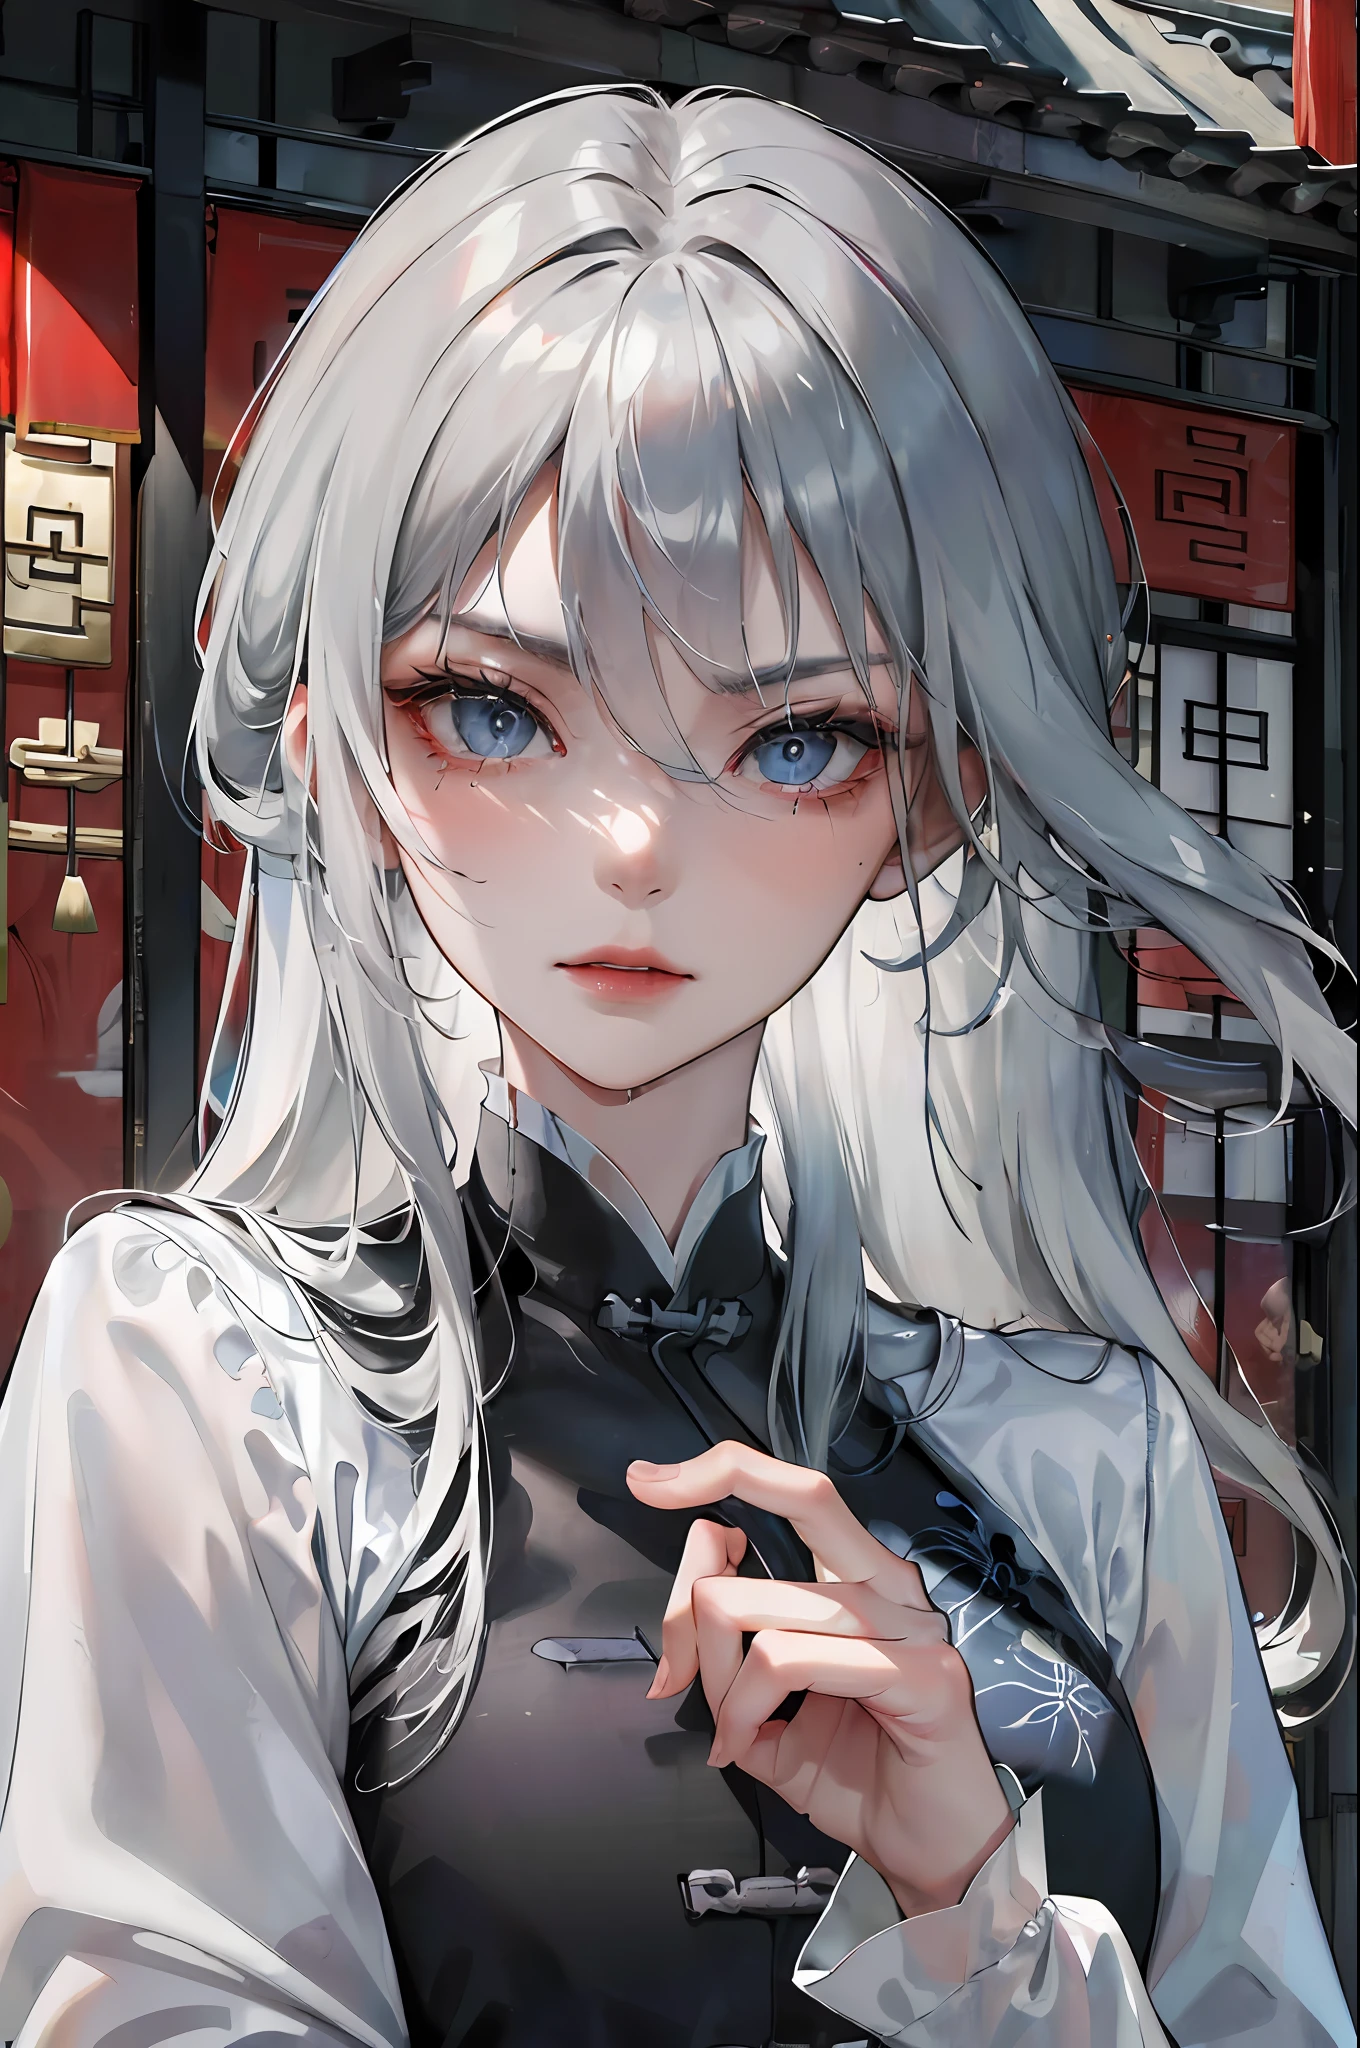 (Masterpiece, Excellent), Night, Rainy Day, (Chinese Style, Ancient China), Mature Woman, Silver-White Long-Haired Woman, Gray-Blue Eyes, Effeminate, Assassin, Short Knife, White Clothes, Black Clothing Lines, Blood Stains, Blood, Wounds, Delicate Facial Features, Exquisite Facial Features, Cold, Serious, Bangs.